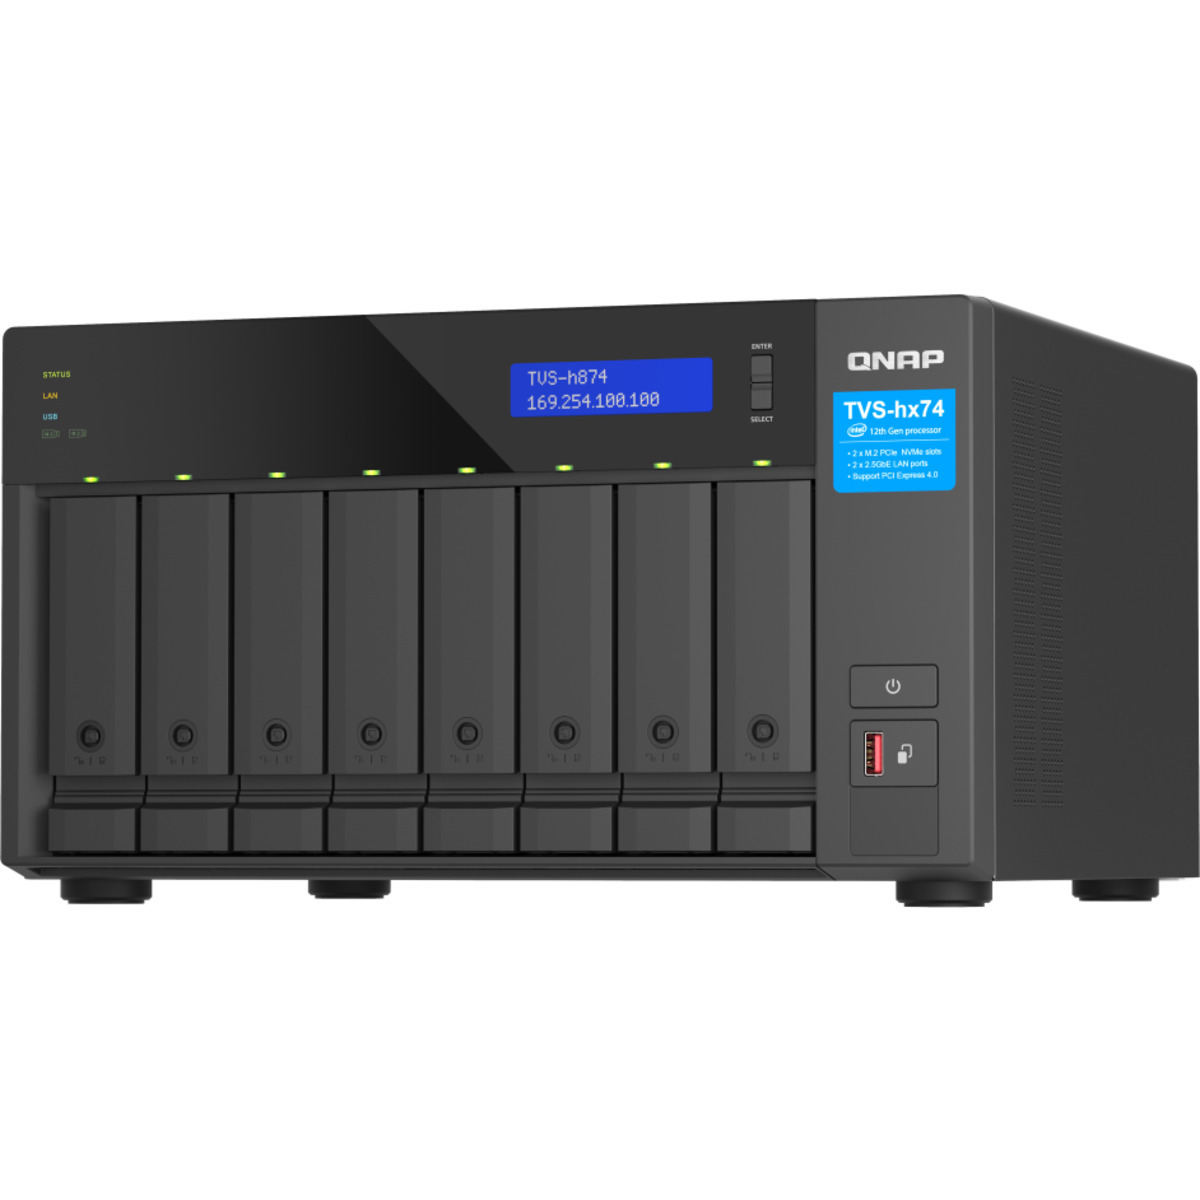 QNAP TVS-h874 Core i5 40tb 8-Bay Desktop Multimedia / Power User / Business NAS - Network Attached Storage Device 5x8tb Western Digital Ultrastar DC HC320 HUS728T8TALE6L4 3.5 7200rpm SATA 6Gb/s HDD ENTERPRISE Class Drives Installed - Burn-In Tested TVS-h874 Core i5